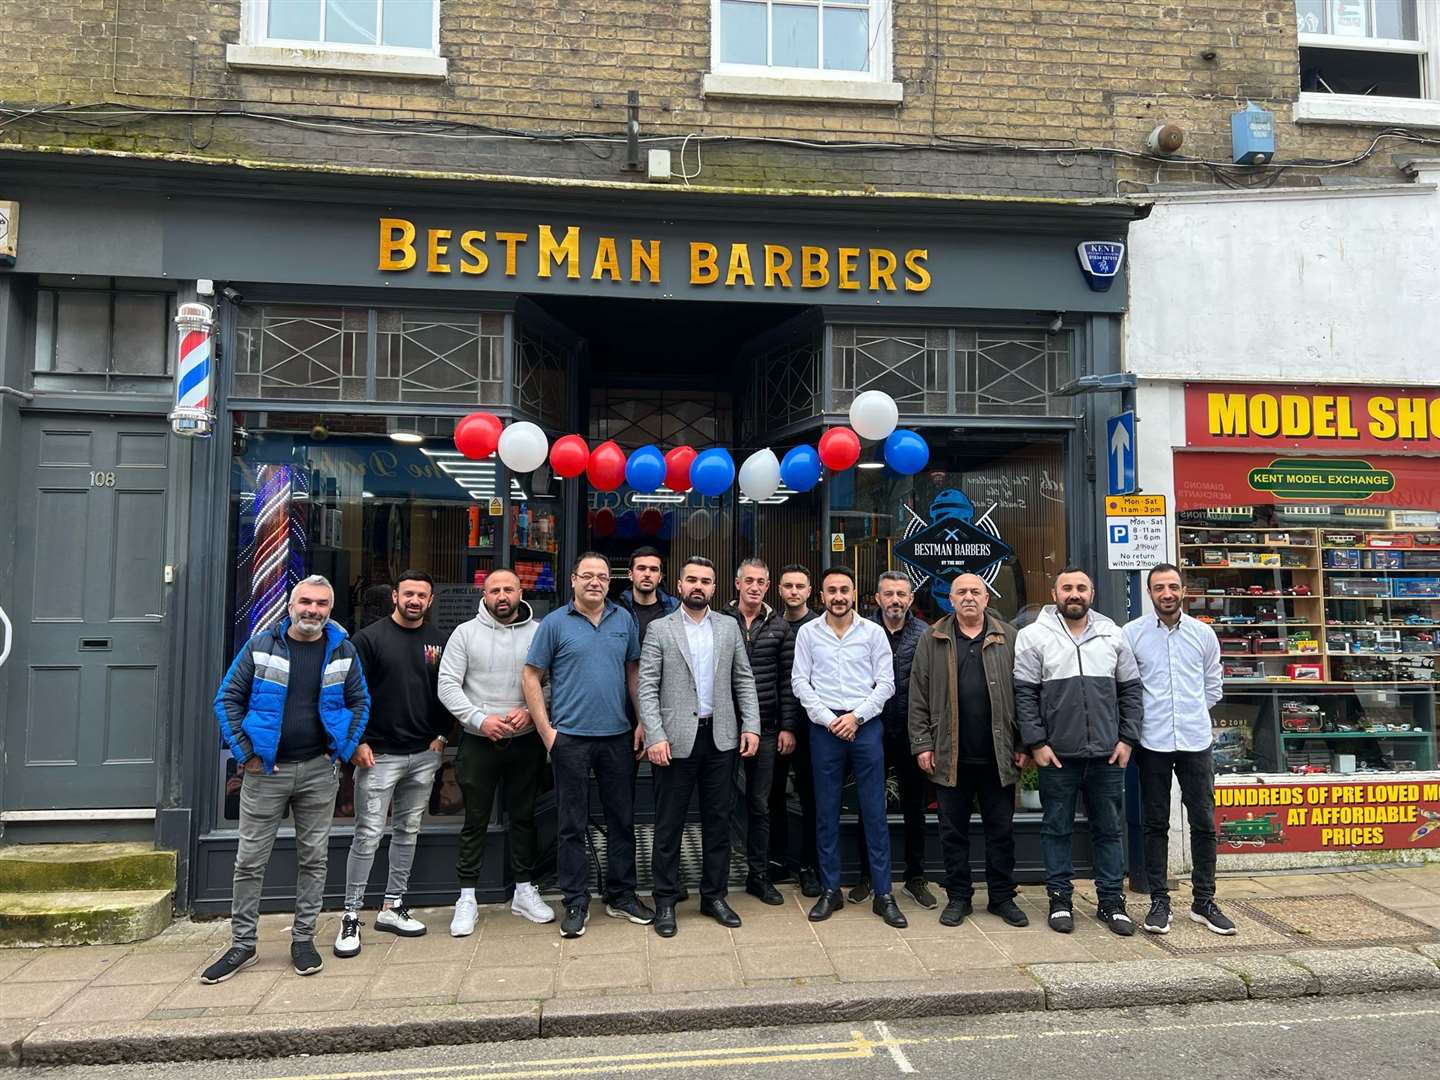 Berkan Yakit, pictured centre in grey jacket, says he is more determined than ever to make BestMan Barbers in Hythe High Street a success